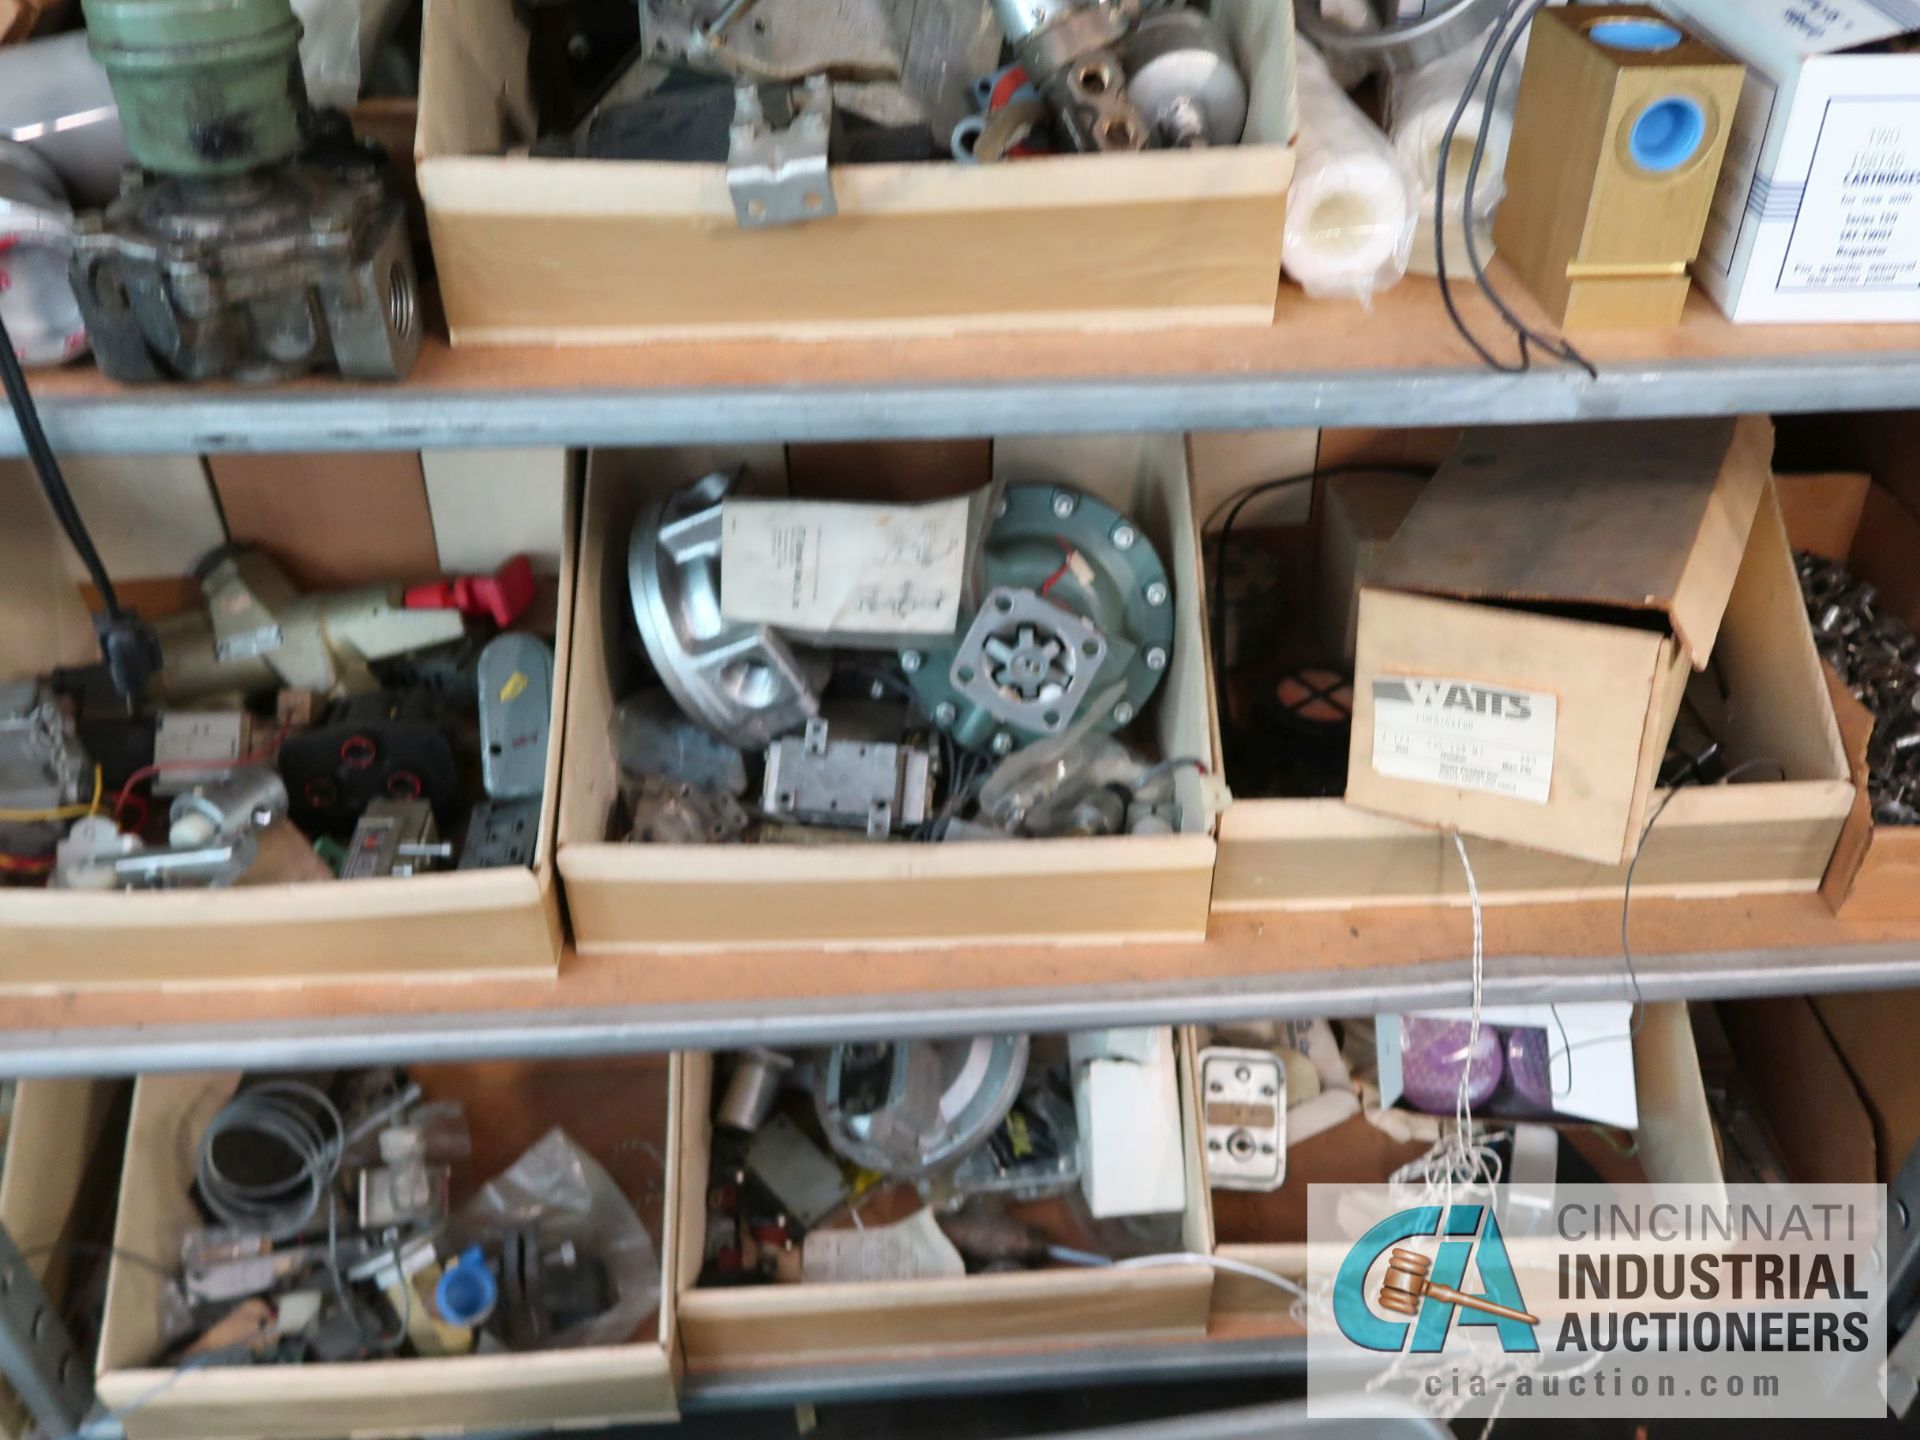 CONTENTS OF (16) SHELVES INCLUDING MISCELLANEOUS VALVES, THERMOSTATS, ANALYZERS, ELECTRICAL, CONTROL - Image 43 of 47